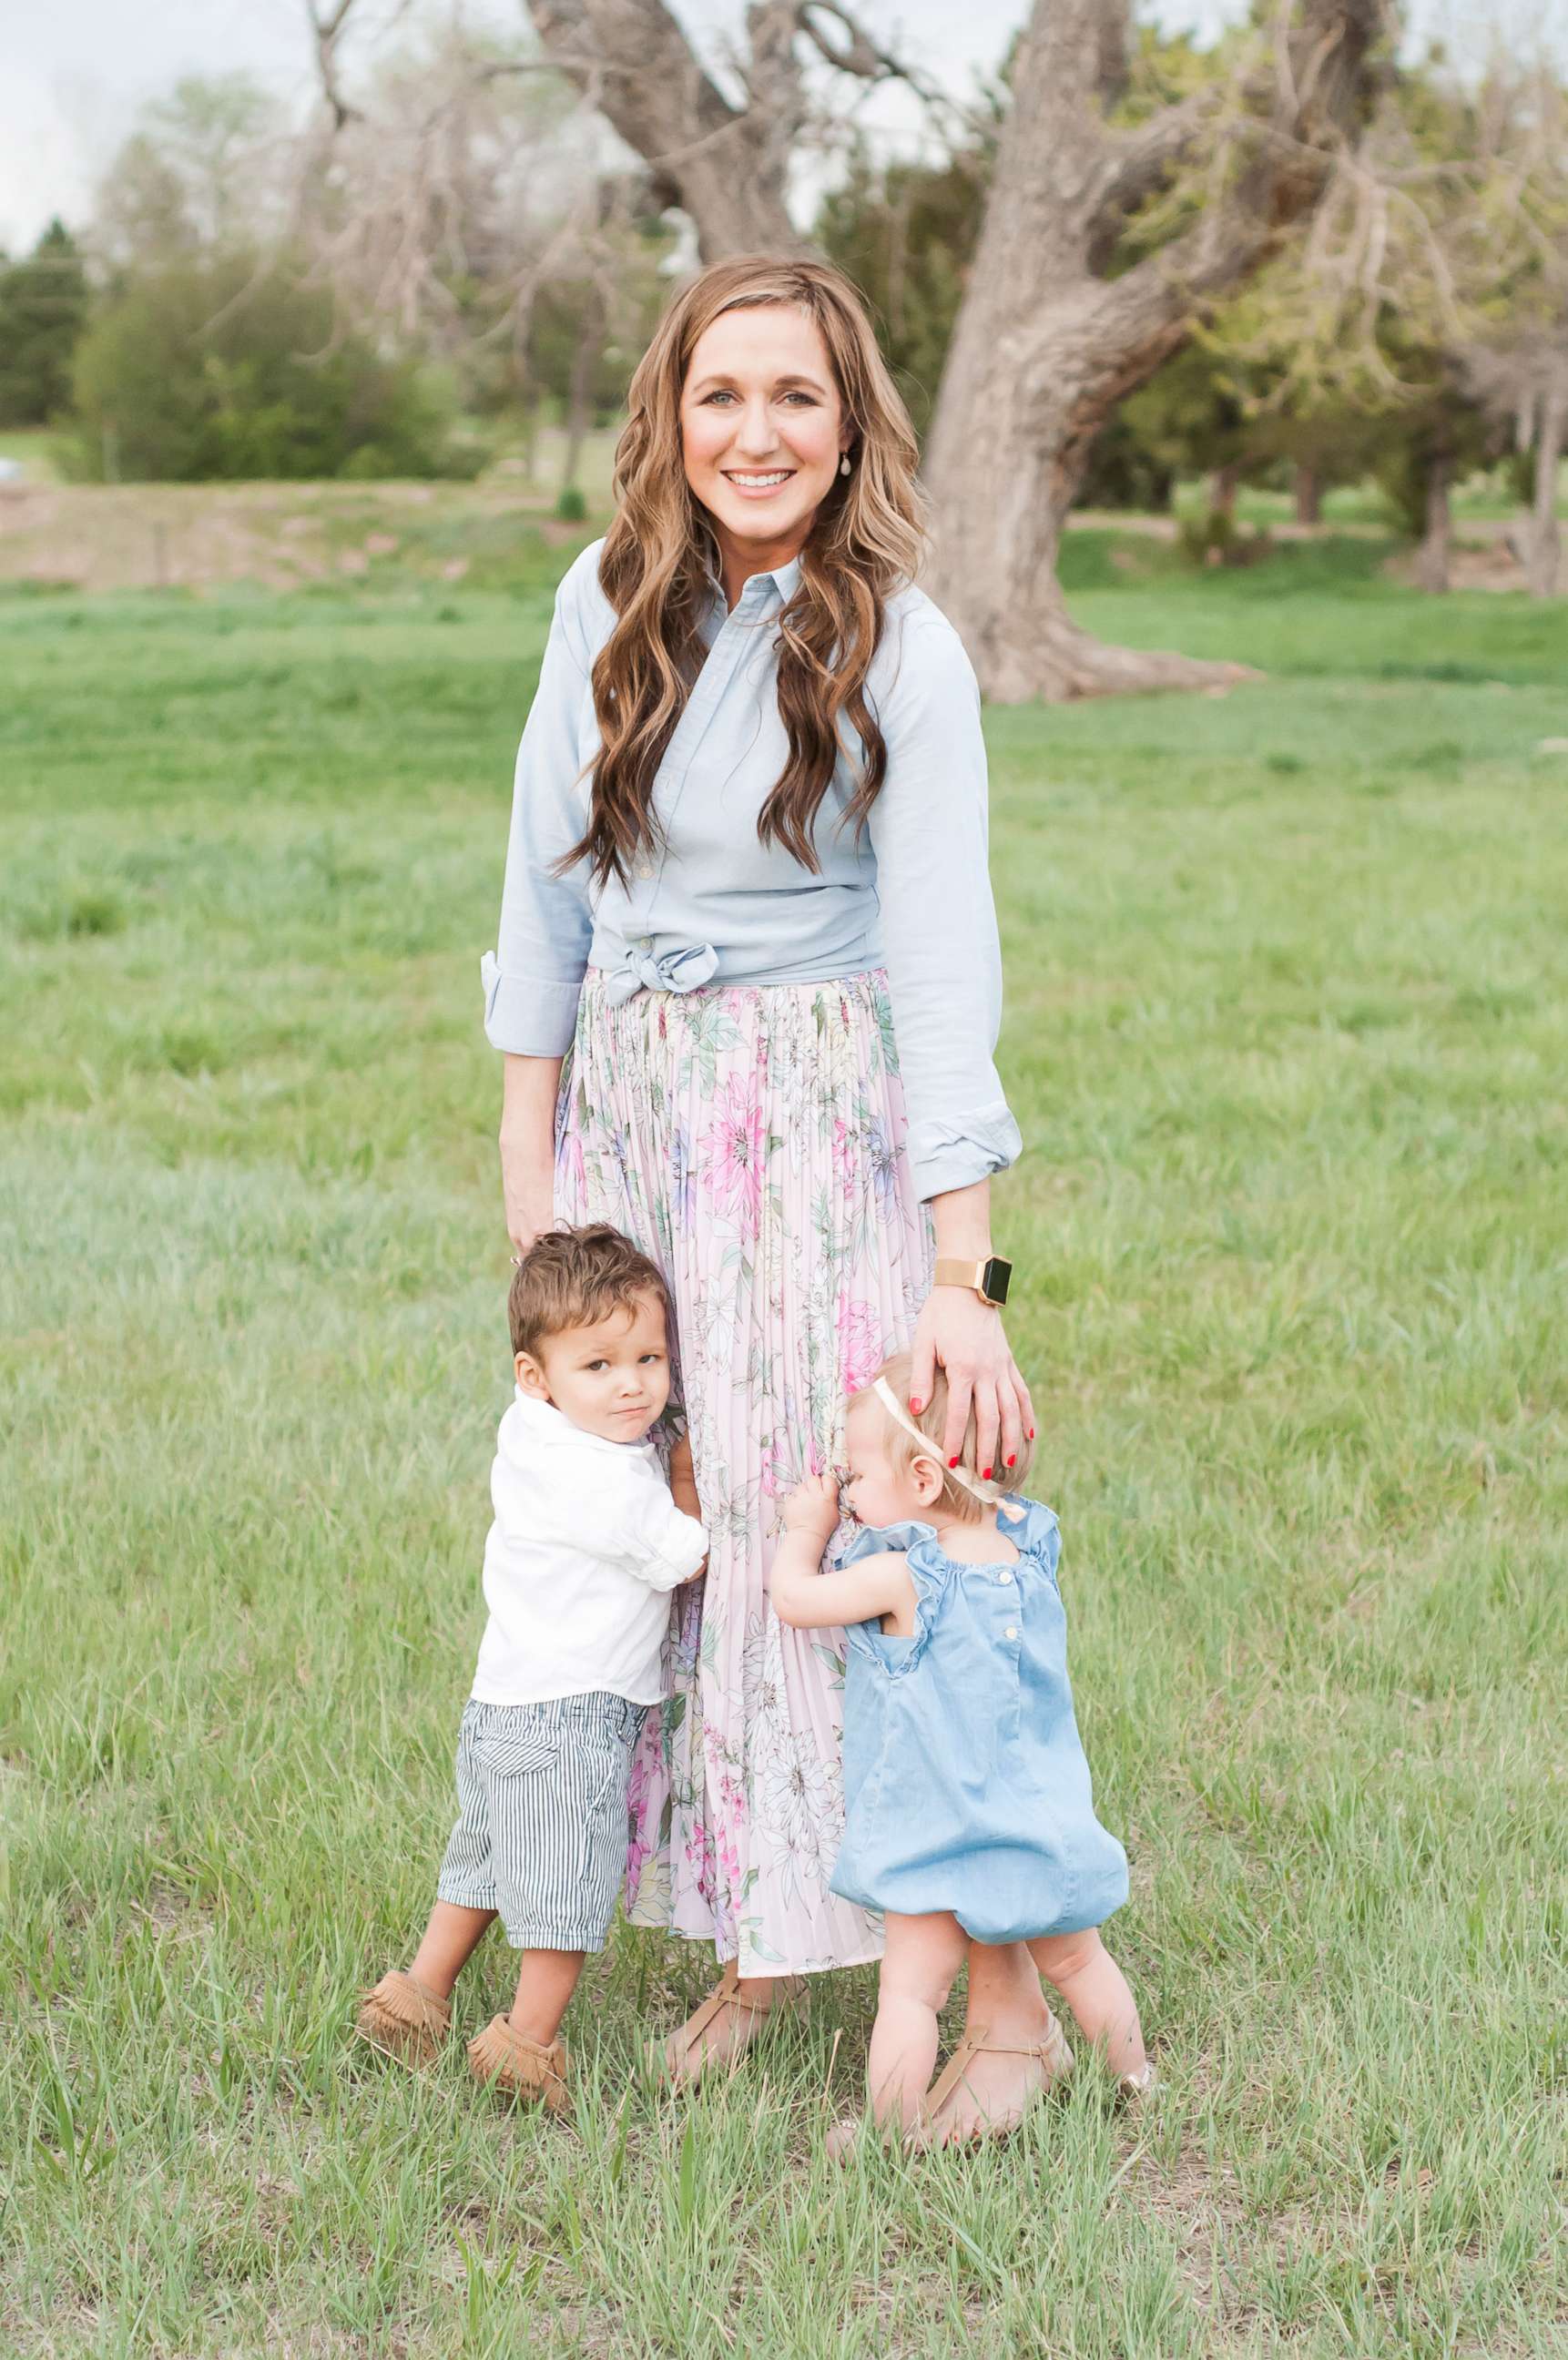 PHOTO: Katie Page of Parker, Colorado, photographed with her newly adopted children, Grayson, 2 and Hannah, 1.